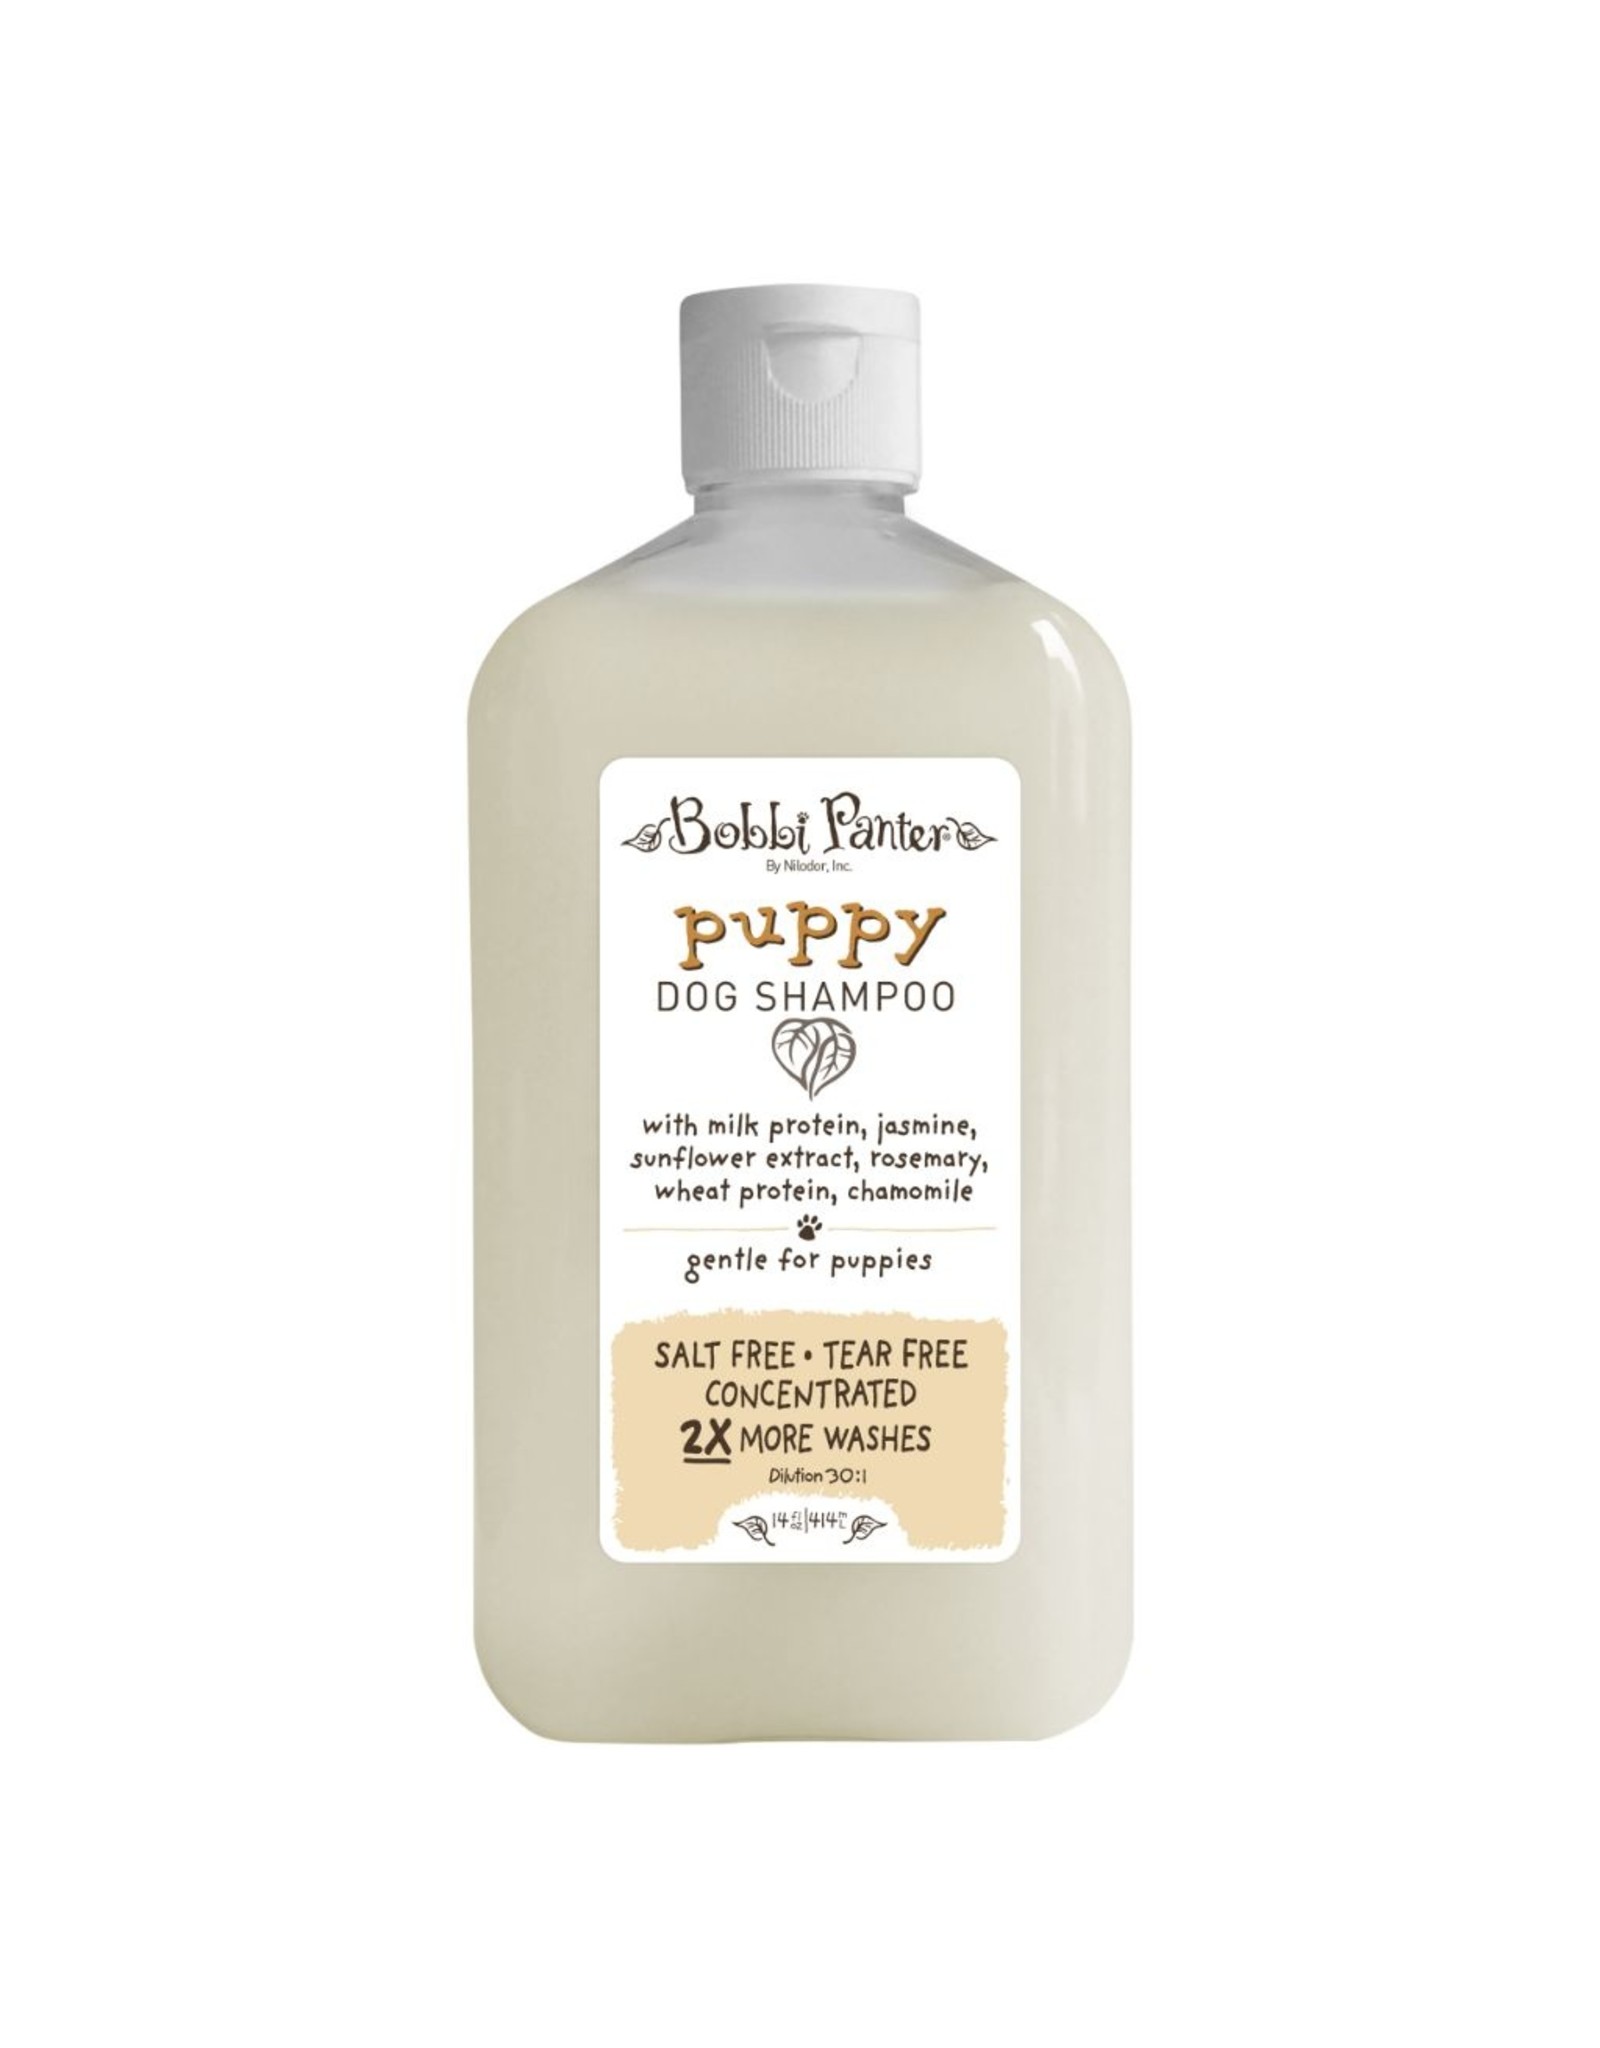 Petology Puppy Faces Tear-Free Shampoo, 8 oz — Girl with the Dogs